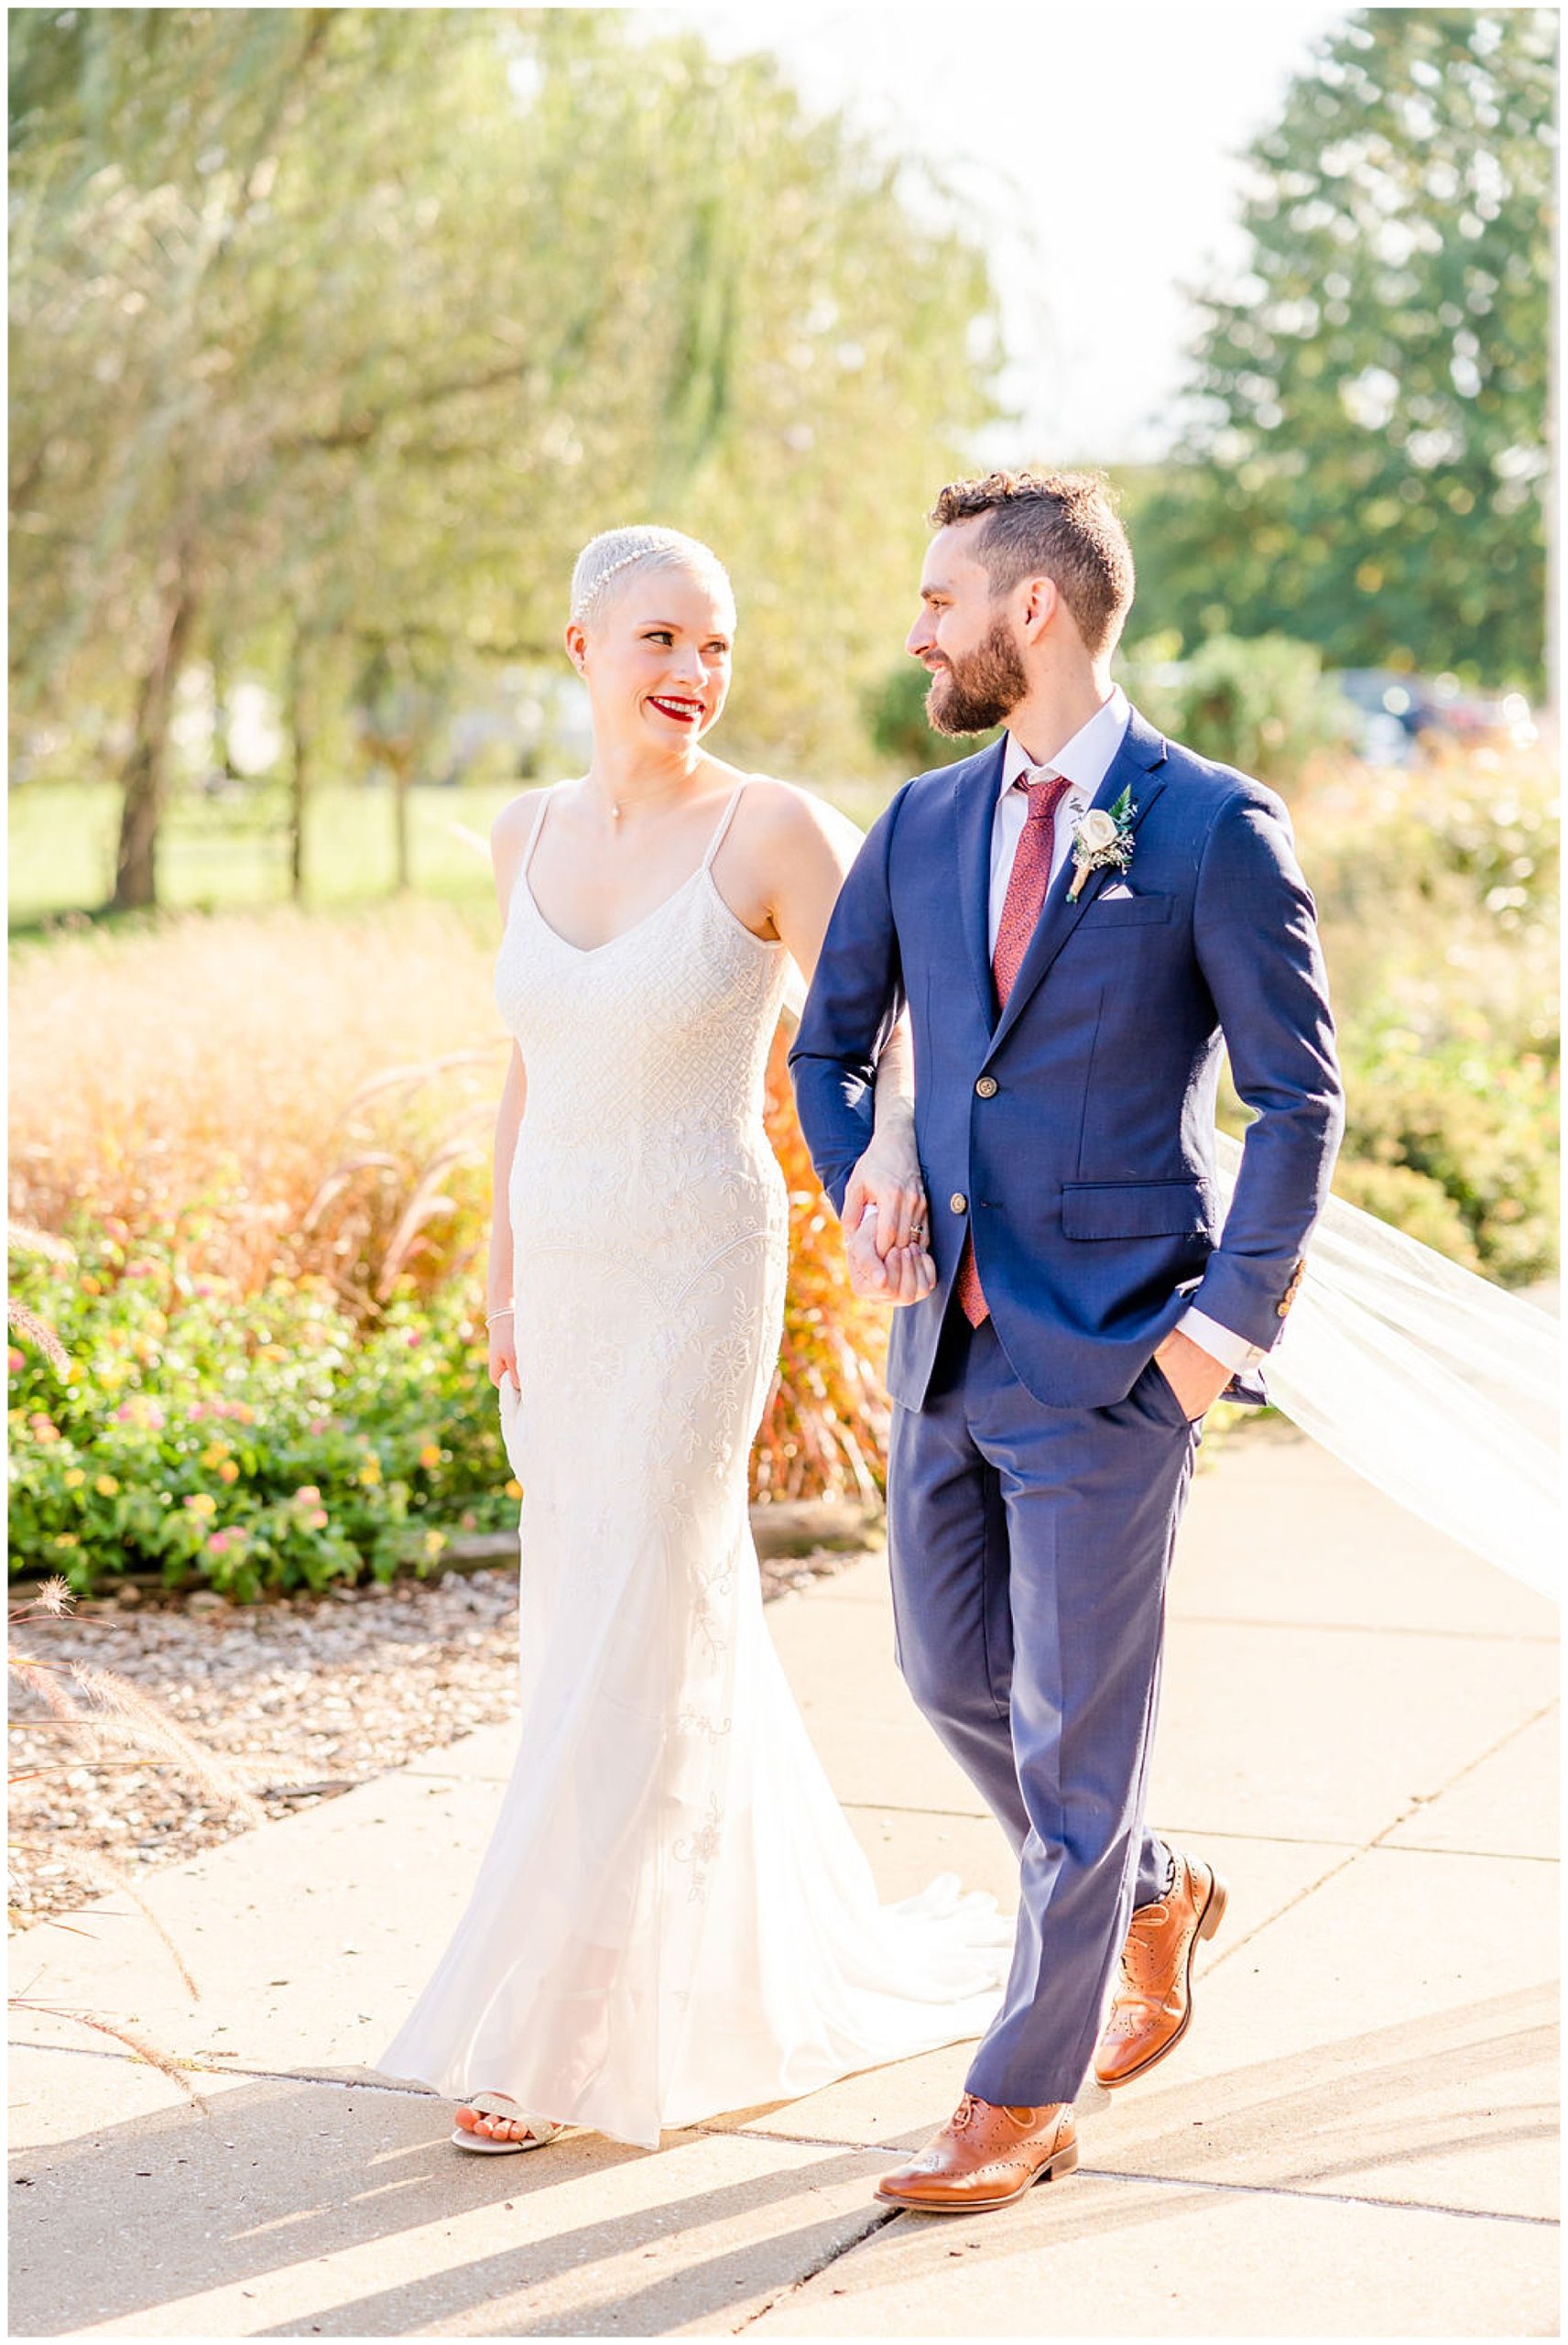 ethereal Rawlings Conservatory wedding, Baltimore wedding venues, Baltimore wedding photographer, Baltimore micro-wedding, Baltimore wedding photography, autumn wedding aesthetic, botanical gardens wedding, Baltimore botanical garden wedding, DC wedding photographer, Rachel E.H. Photography, couple linking arms and walking, couple on stone path, couple smiling at each other, Indochino navy suit